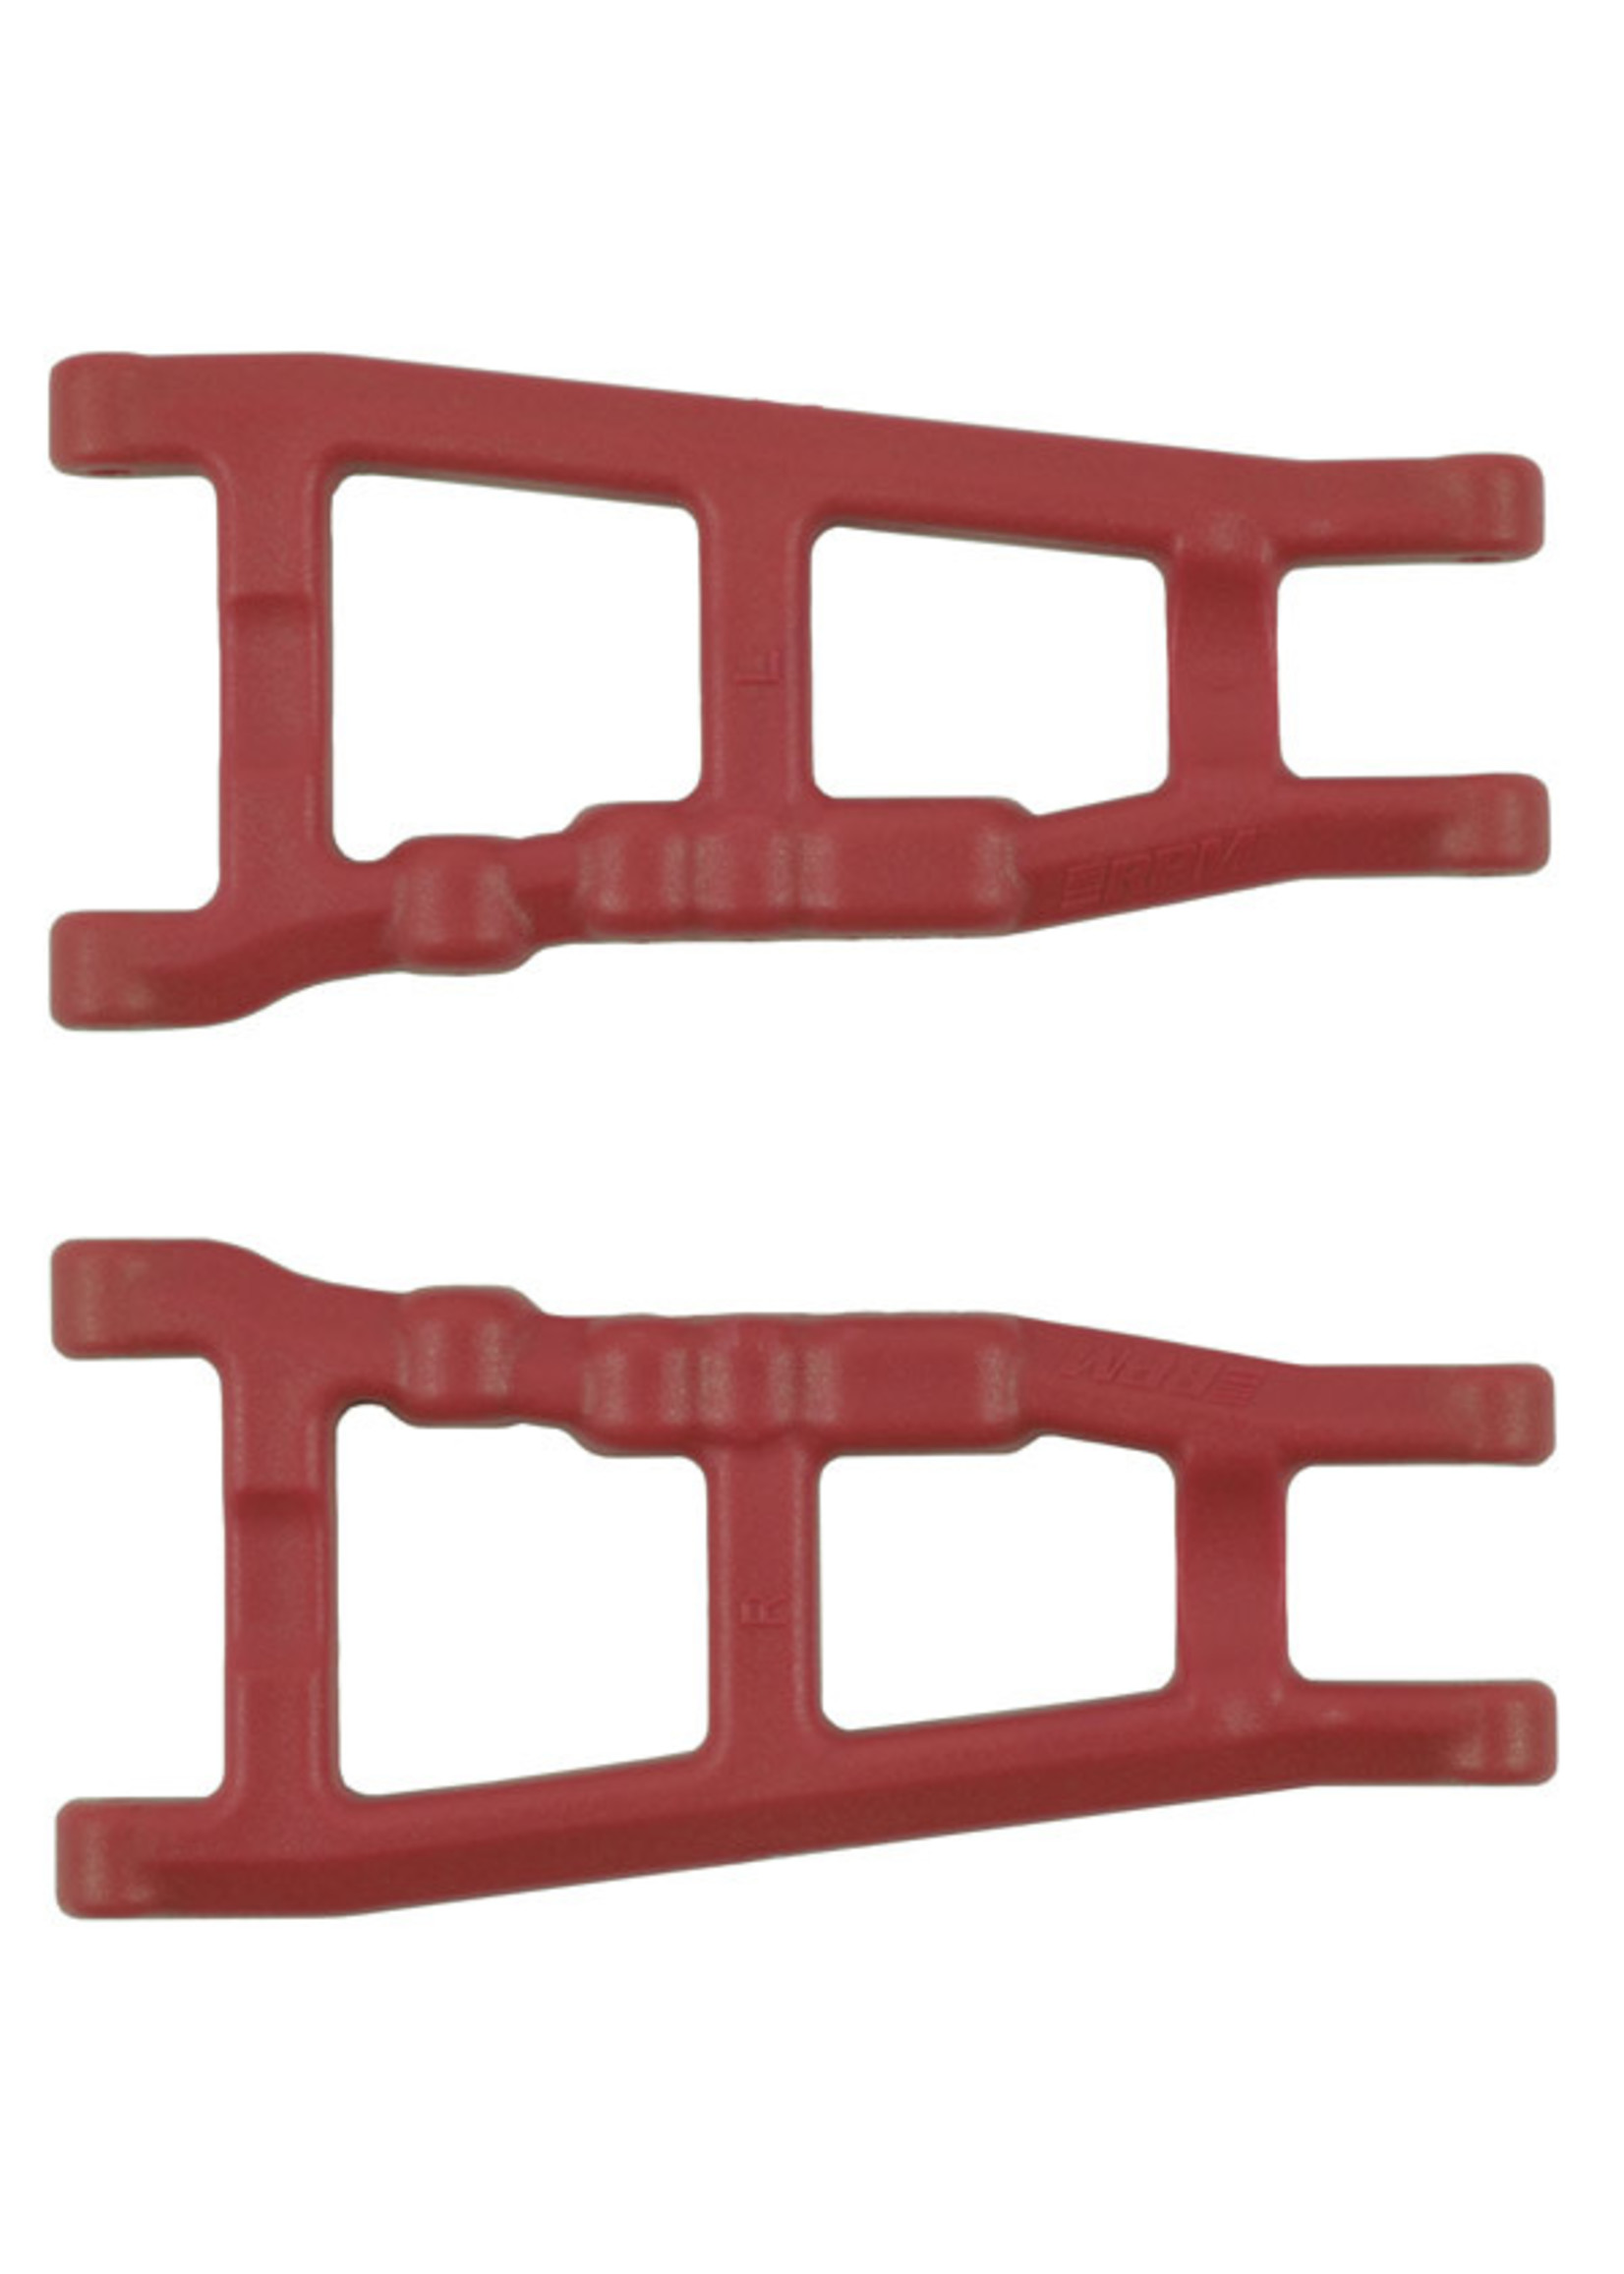 RPM RPM80709 RPM Front or Rear A-Arms for Traxxas Slash 4x4 or Rustler 4x4, Red